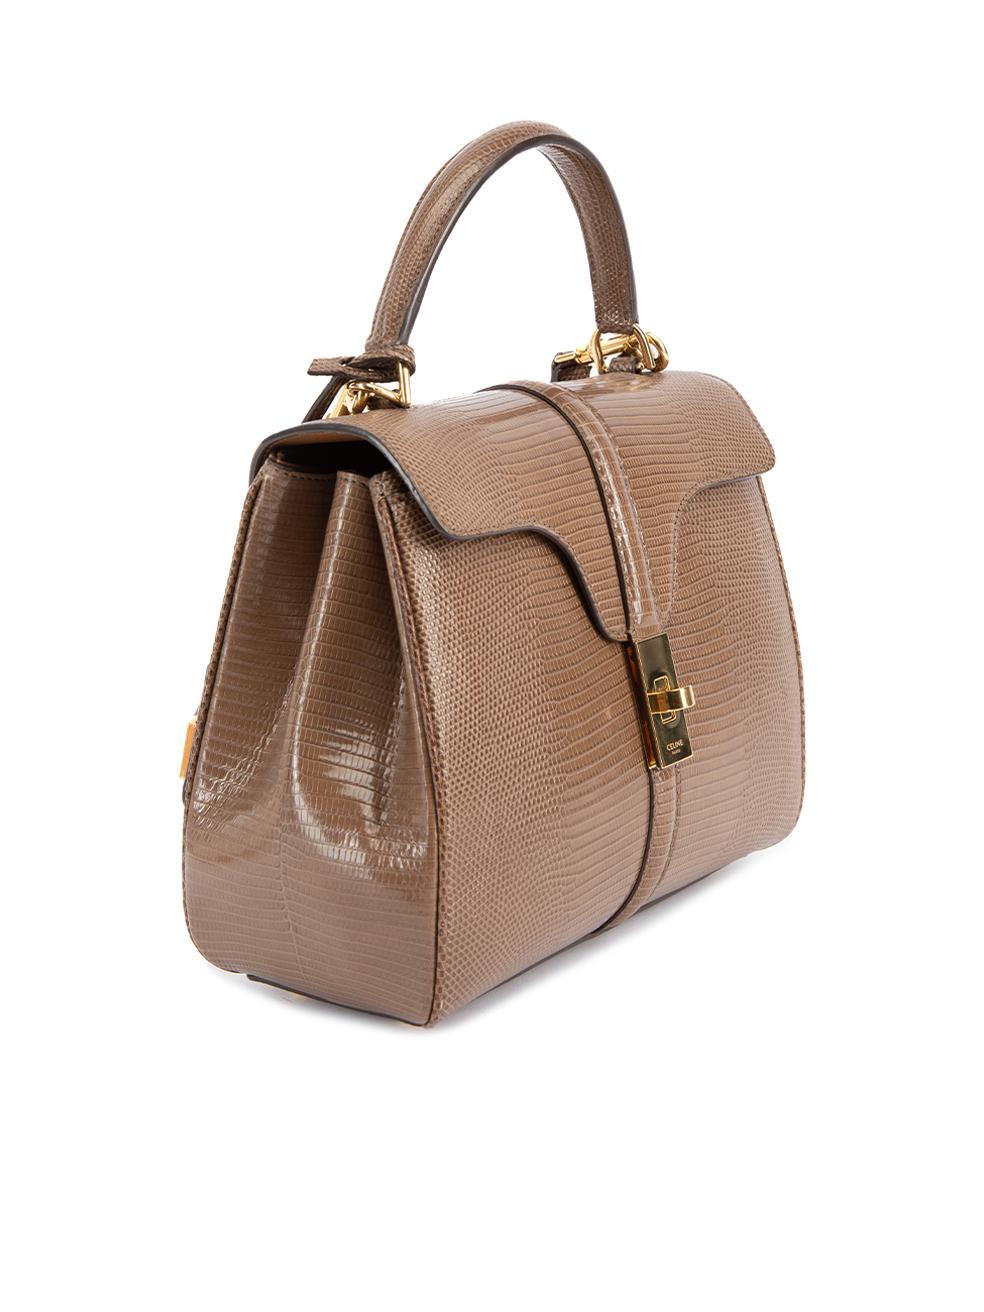 CONDITION is Very good. Minimal wear to bag is evident. Minimal wear to the leather interior where marks can be seen on this used Celine designer resale item. Details Brown Lizard leather Mini top handle bag 2x Top handle 1x Detachable shoulder